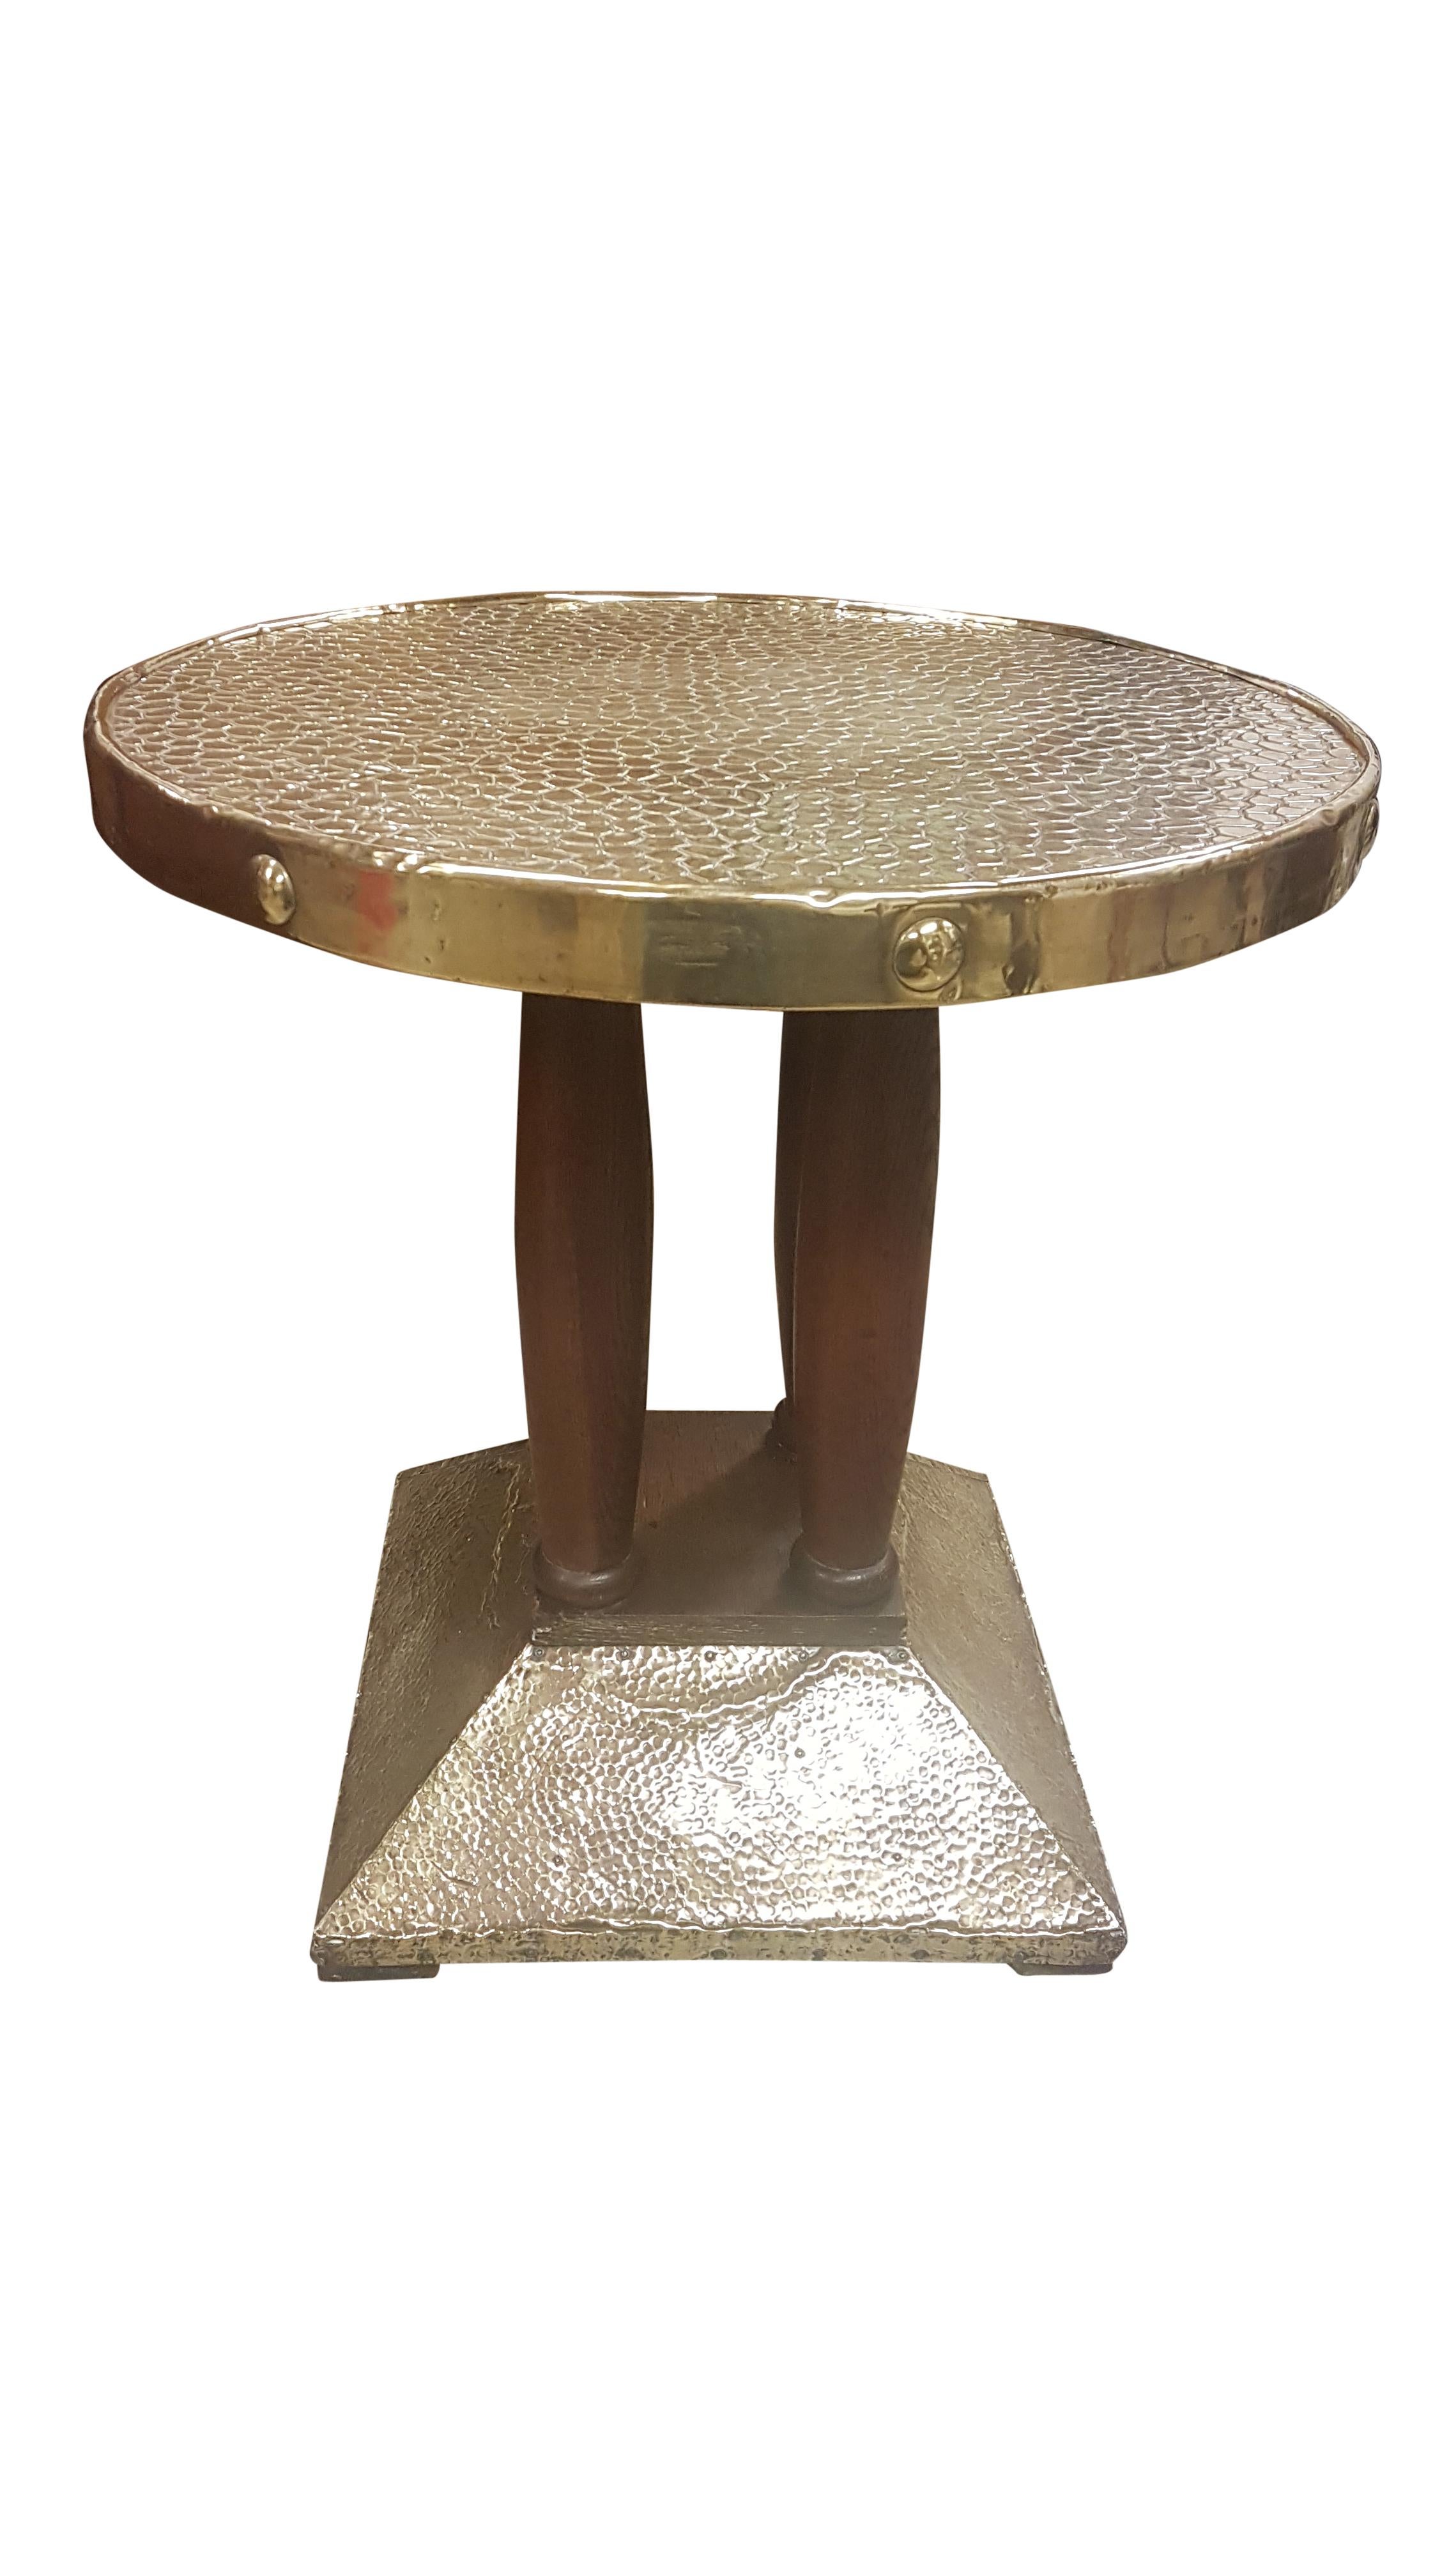 A great quality strong and sturdy oak and brass side table with quadruped solid oak column centre. The base is of pine covered in hand-hammered brass sheet and the top is covered in brass that is in the design of crocodile skin. 
The oak sections